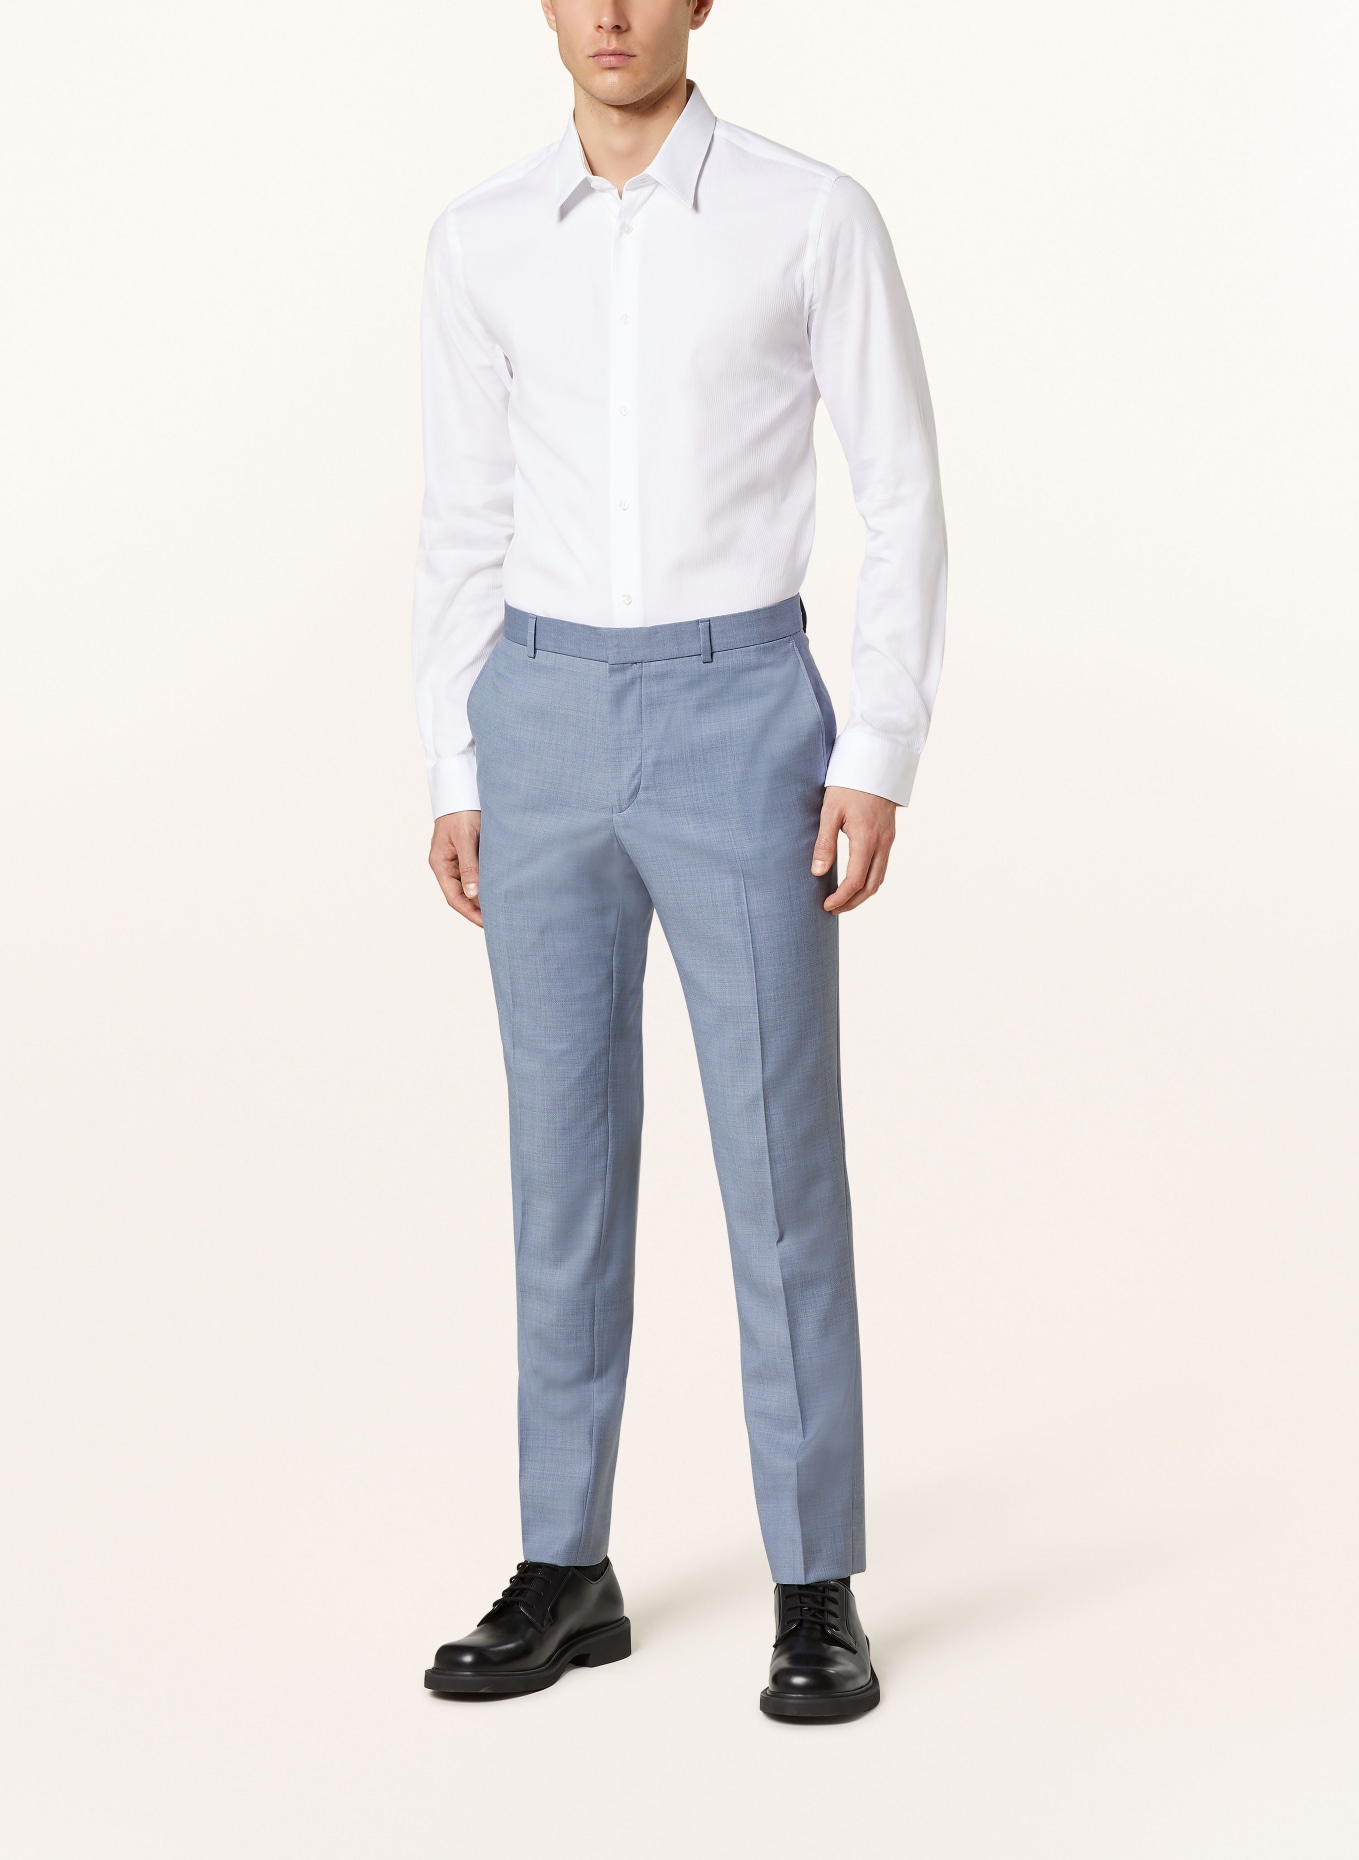 TED BAKER Anzughose ORIONT Slim Fit, Farbe: BLUE BLUE (Bild 3)